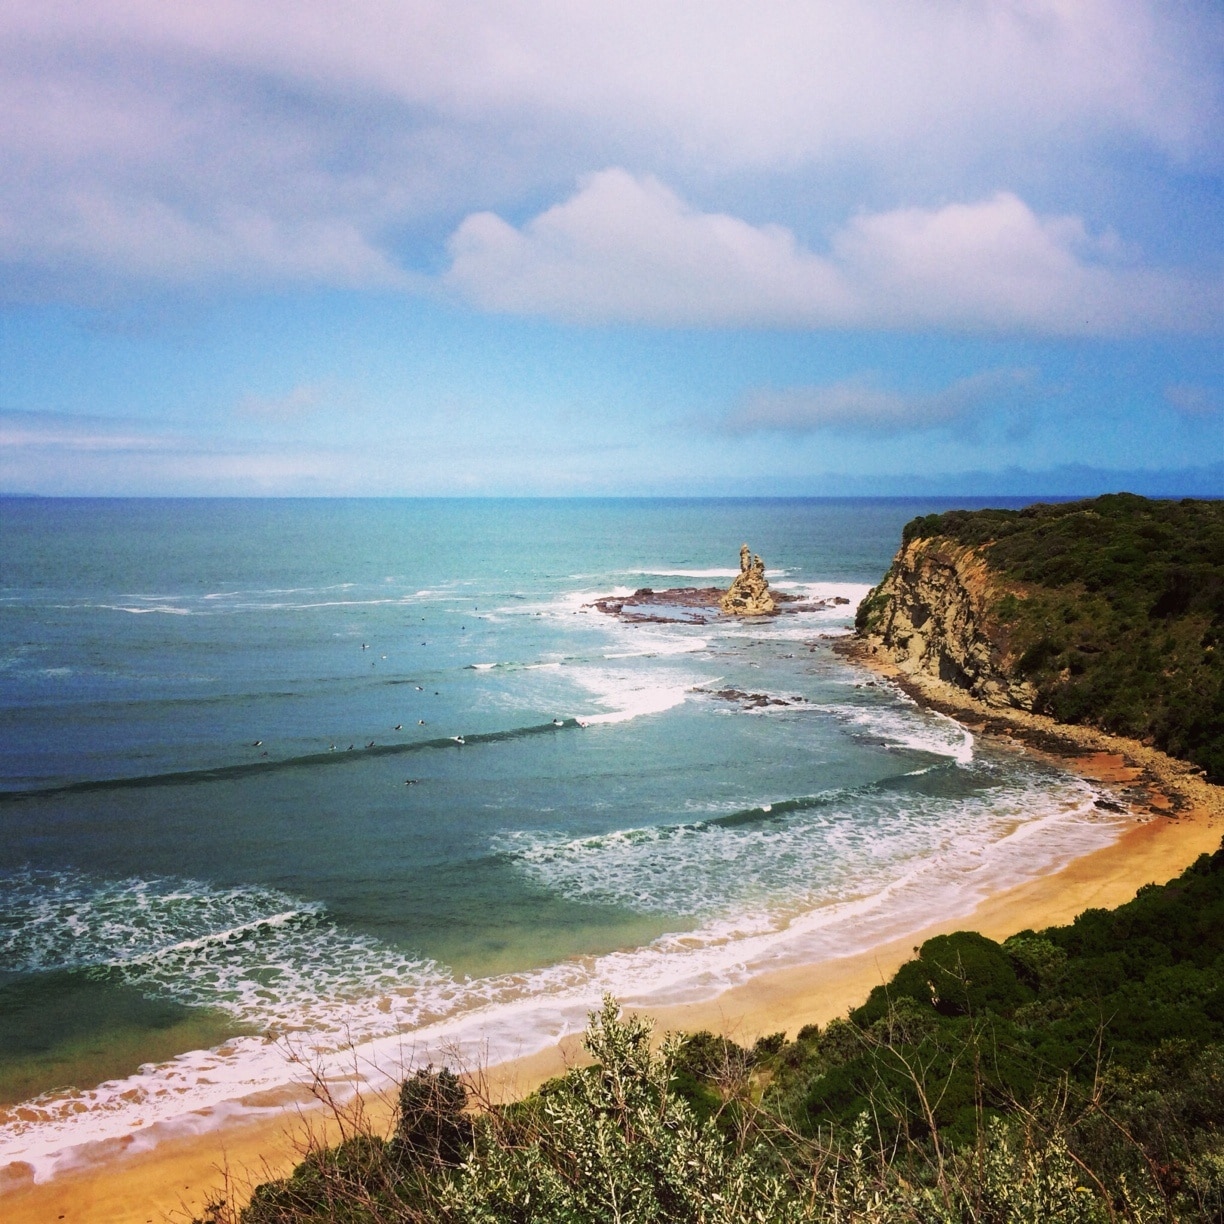 Amazing views from the coastal road. You can see surfers dotted along the cliffs. Not sure what they're up to but be careful of the the rocks! #beachtime #roadtrip